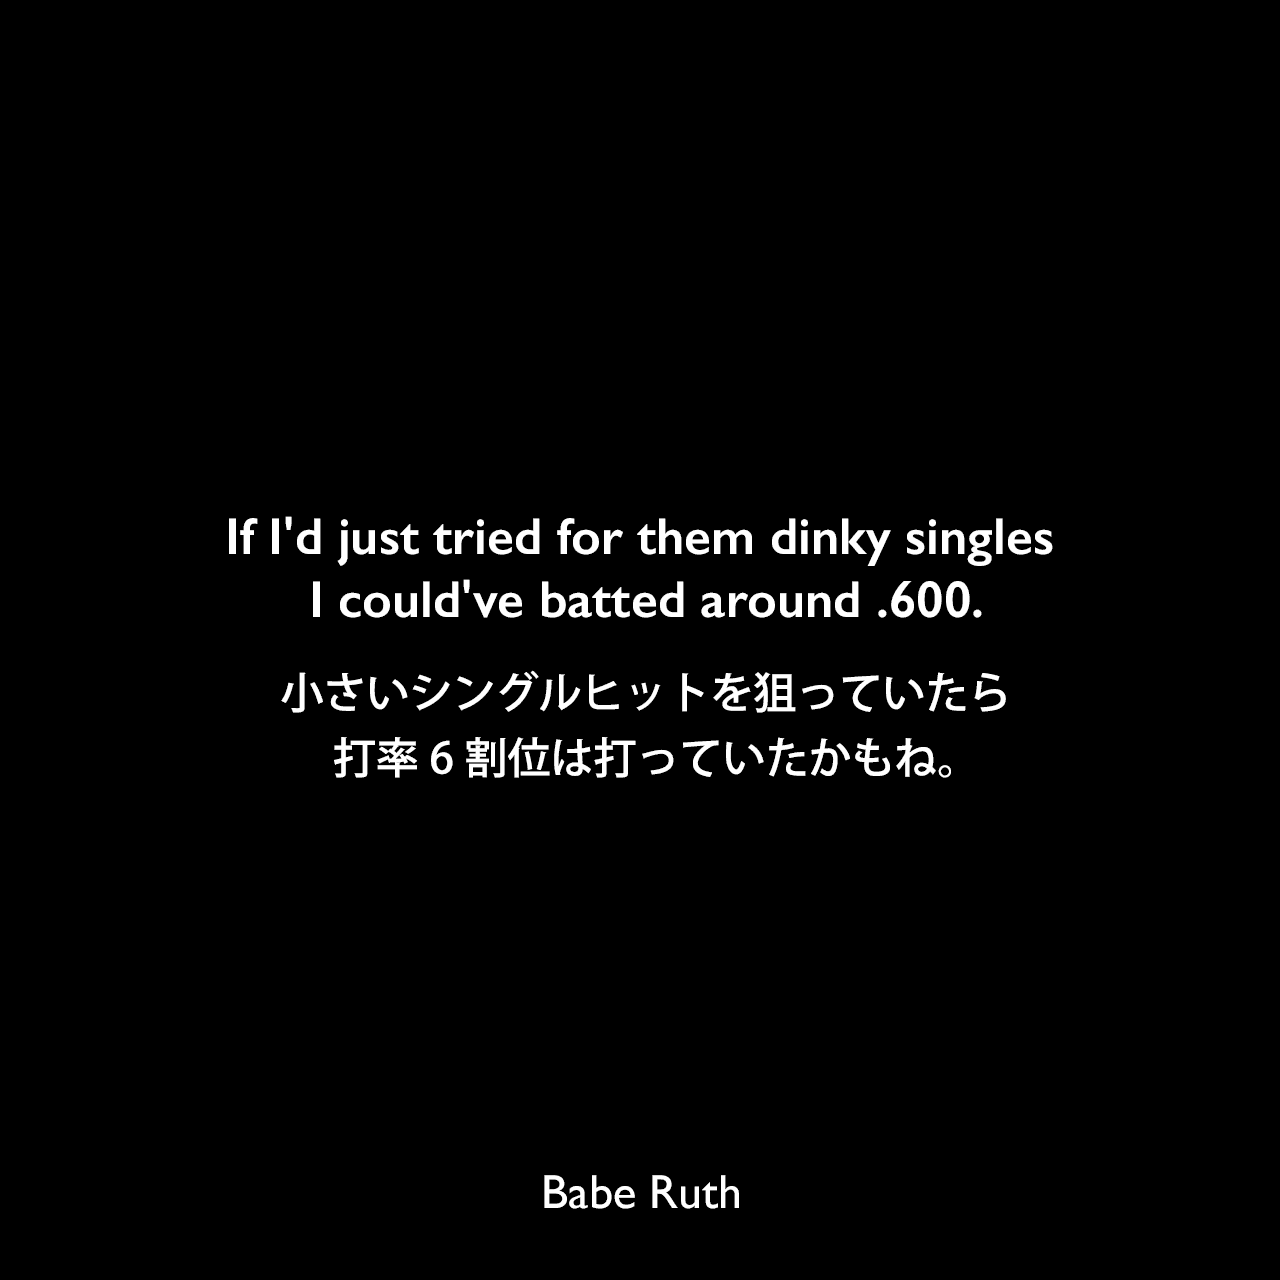 If I'd just tried for them dinky singles I could've batted around .600.小さいシングルヒットを狙っていたら、打率6割位は打っていたかもね。Babe Ruth